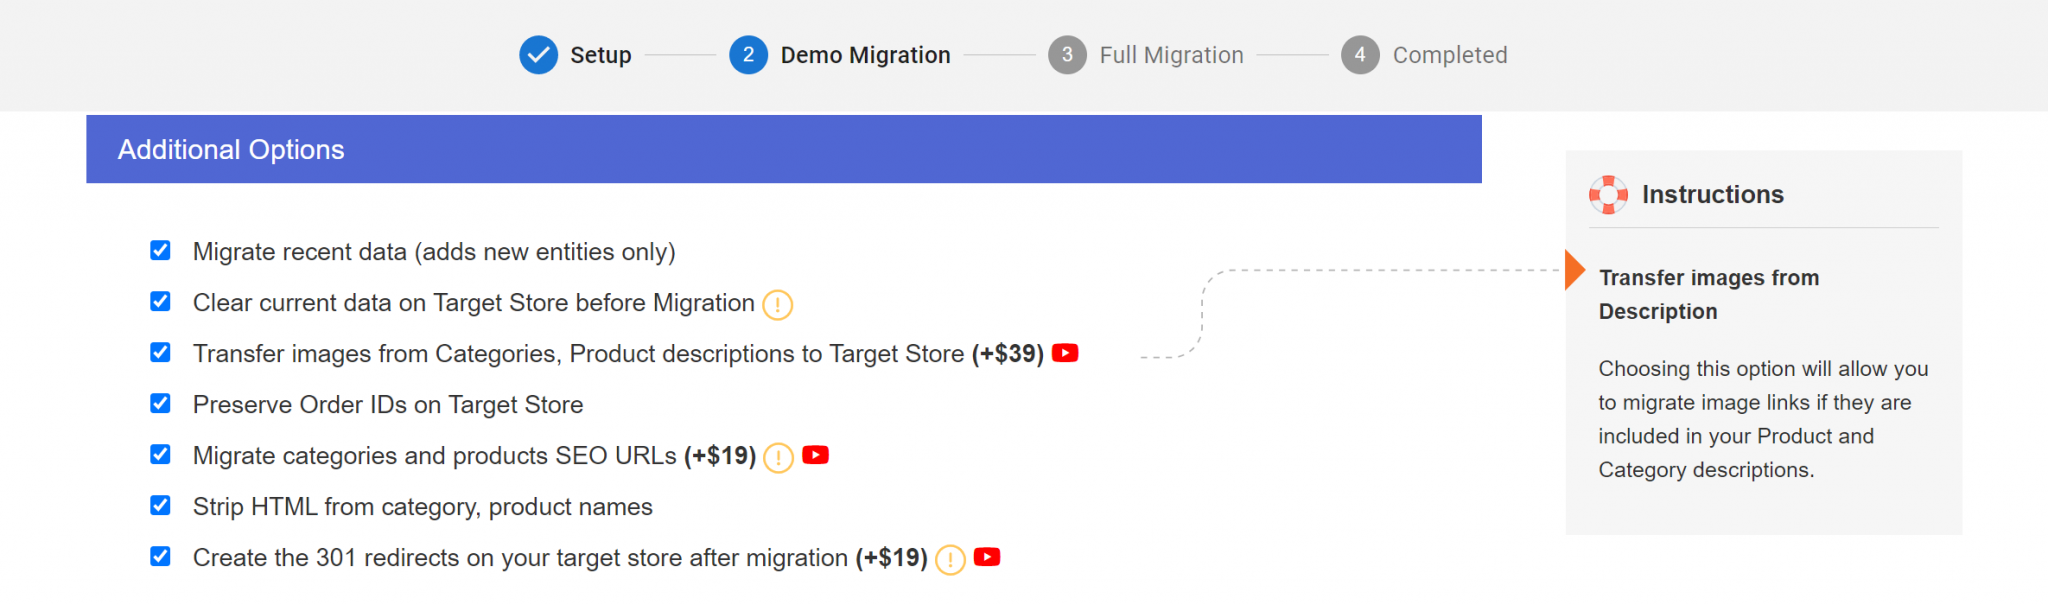 Select the additional data you want to migrate from Shopify to BigCommerce